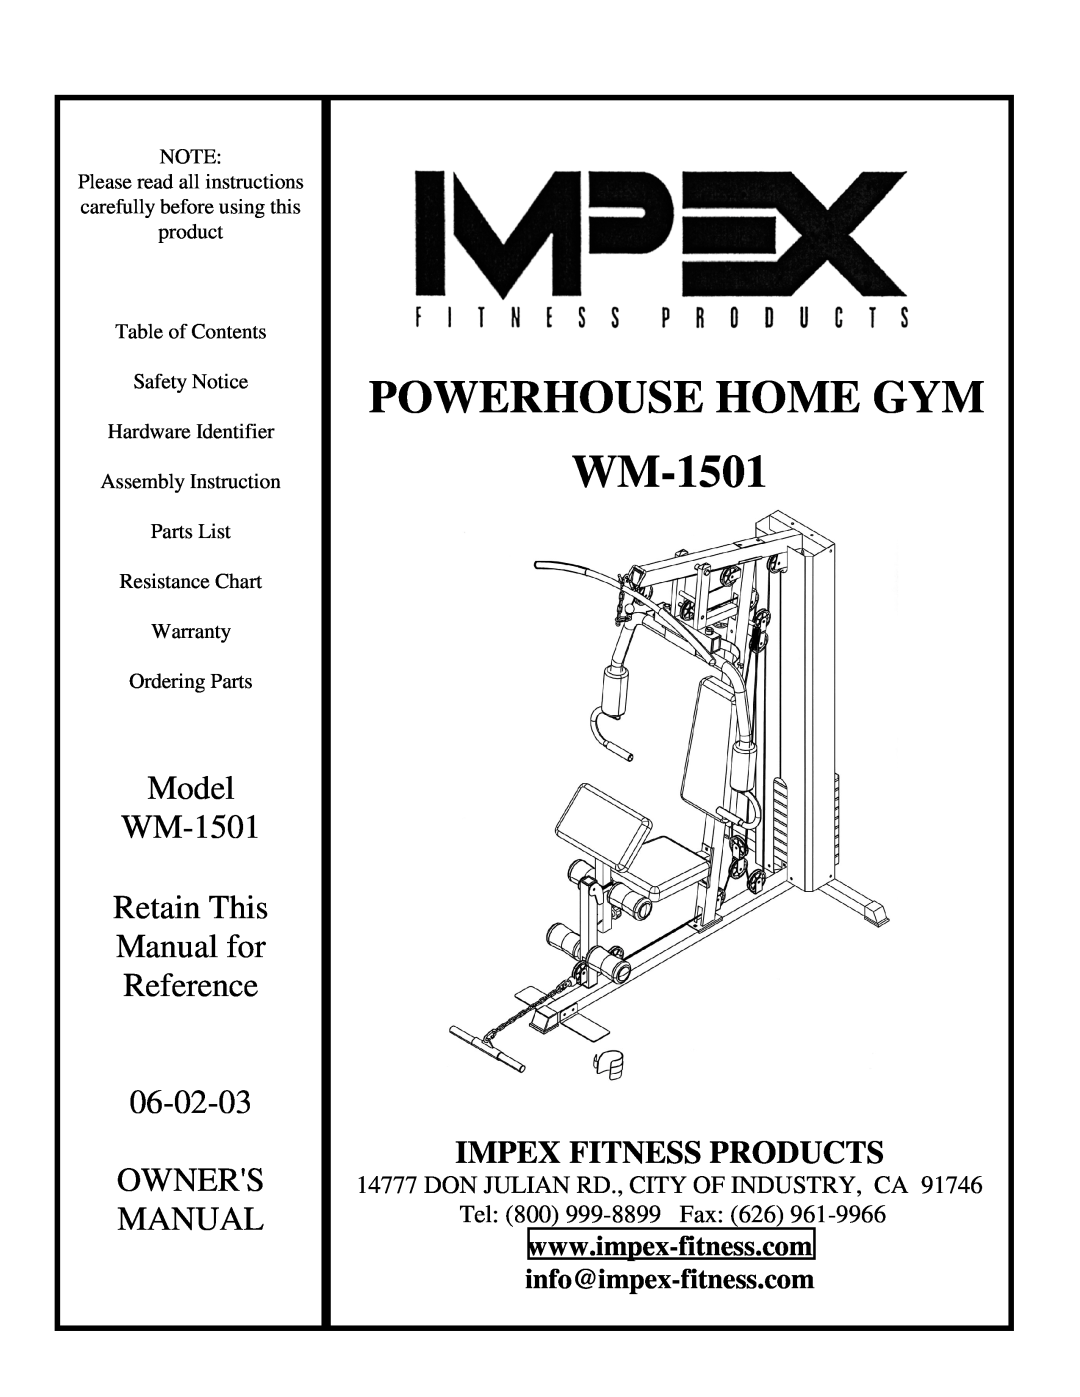 Impex WM-1501 manual info@impex-fitness.com, Powerhouse Home Gym, Model, Retain This, Manual for, Reference, Owners 